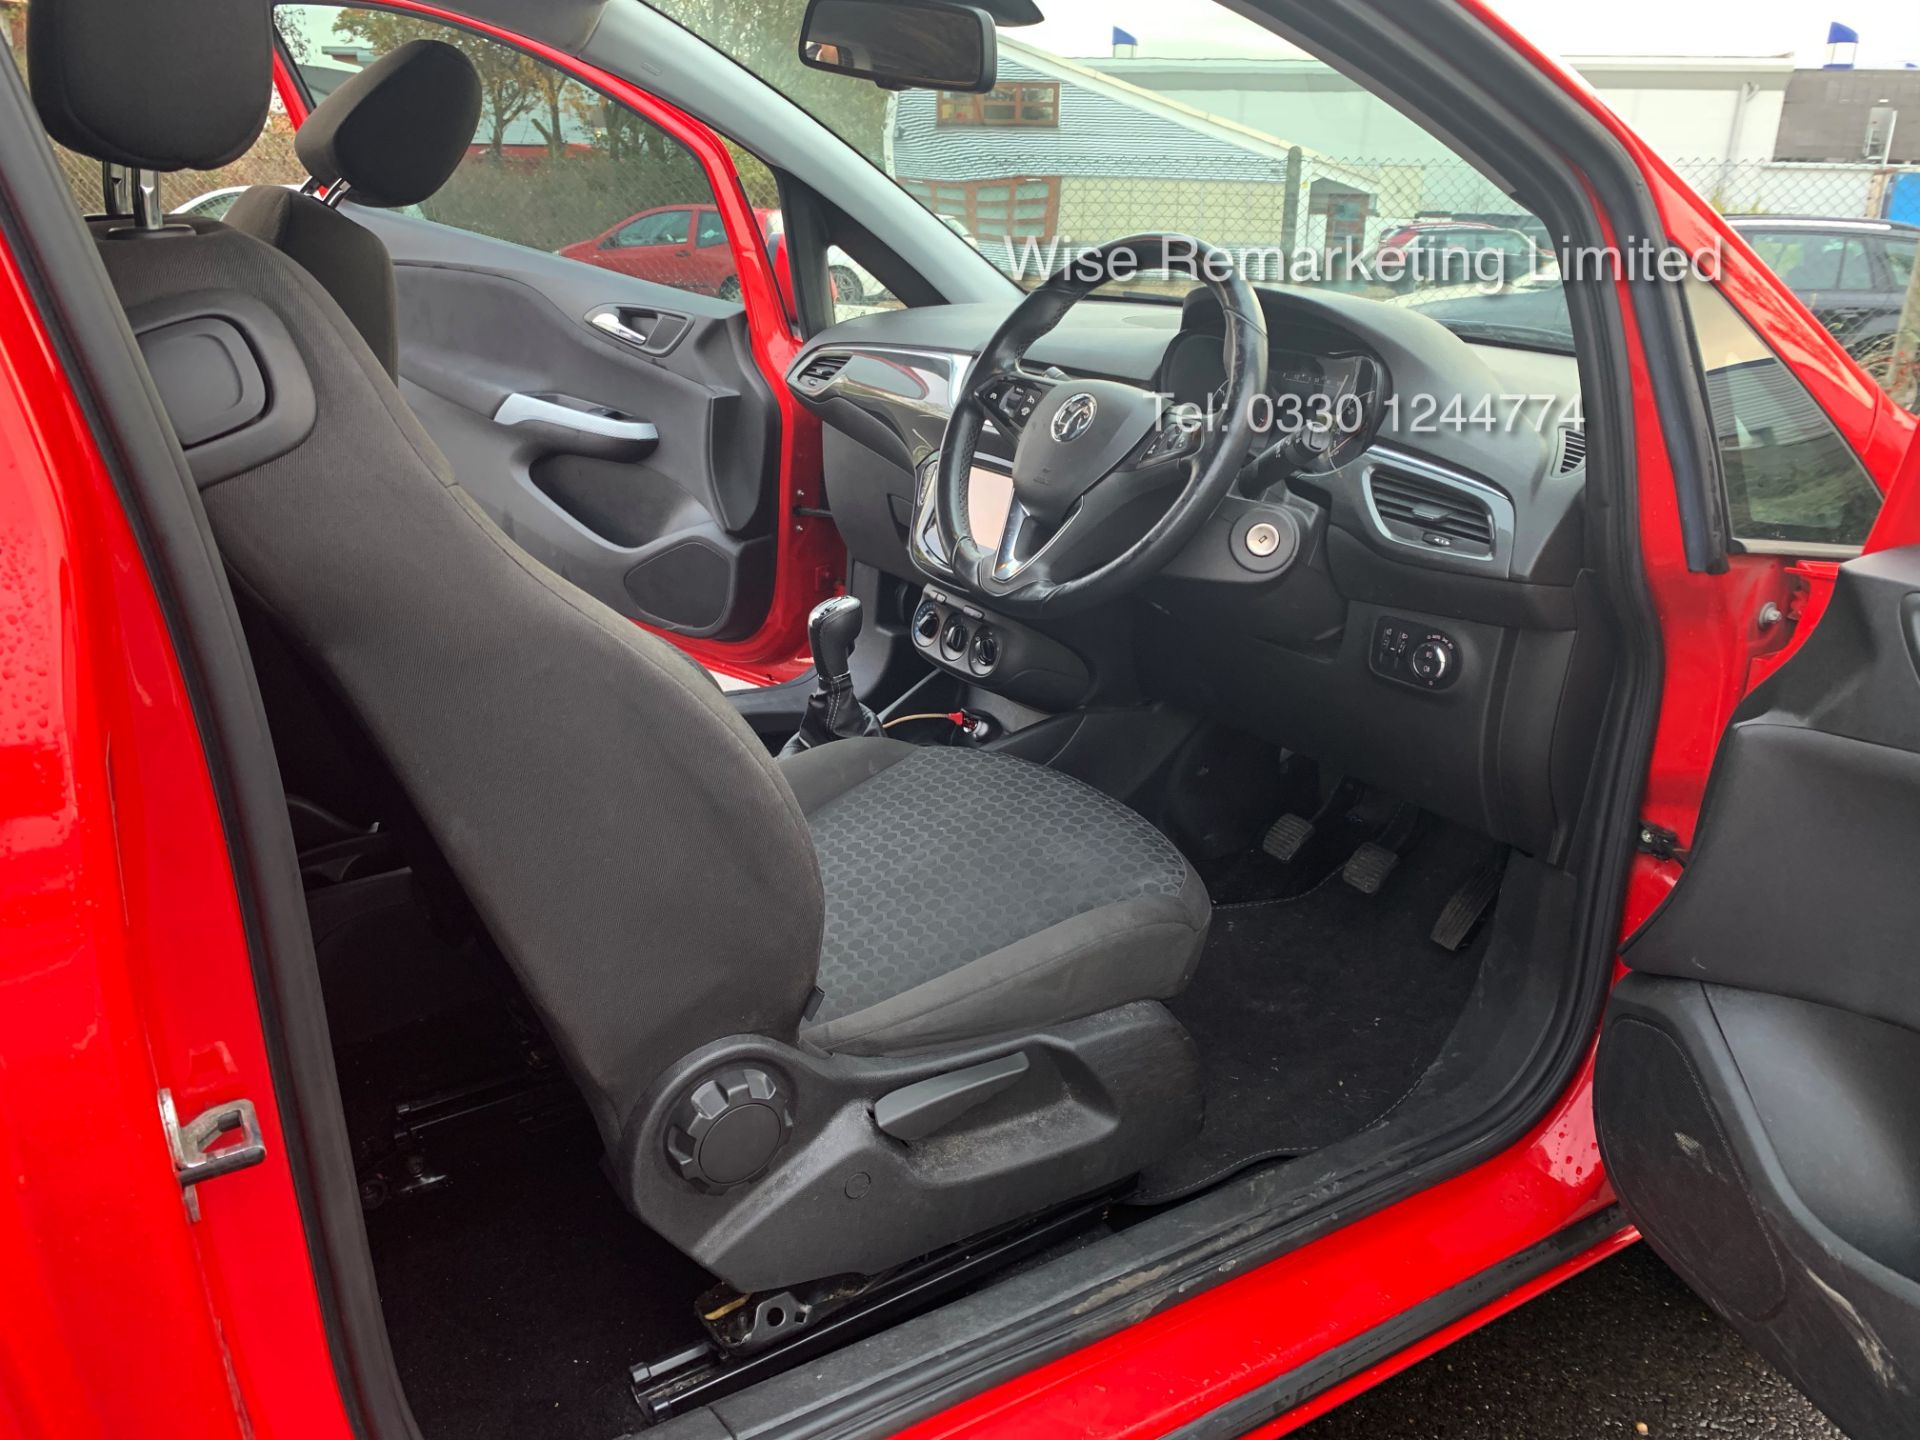 Vauxhall Corsa 1.4 Turbo Excite AC Ecoflex - 2015 15 Reg - Heated Seats - Touch Screen **TOP SPEC** - Image 10 of 22